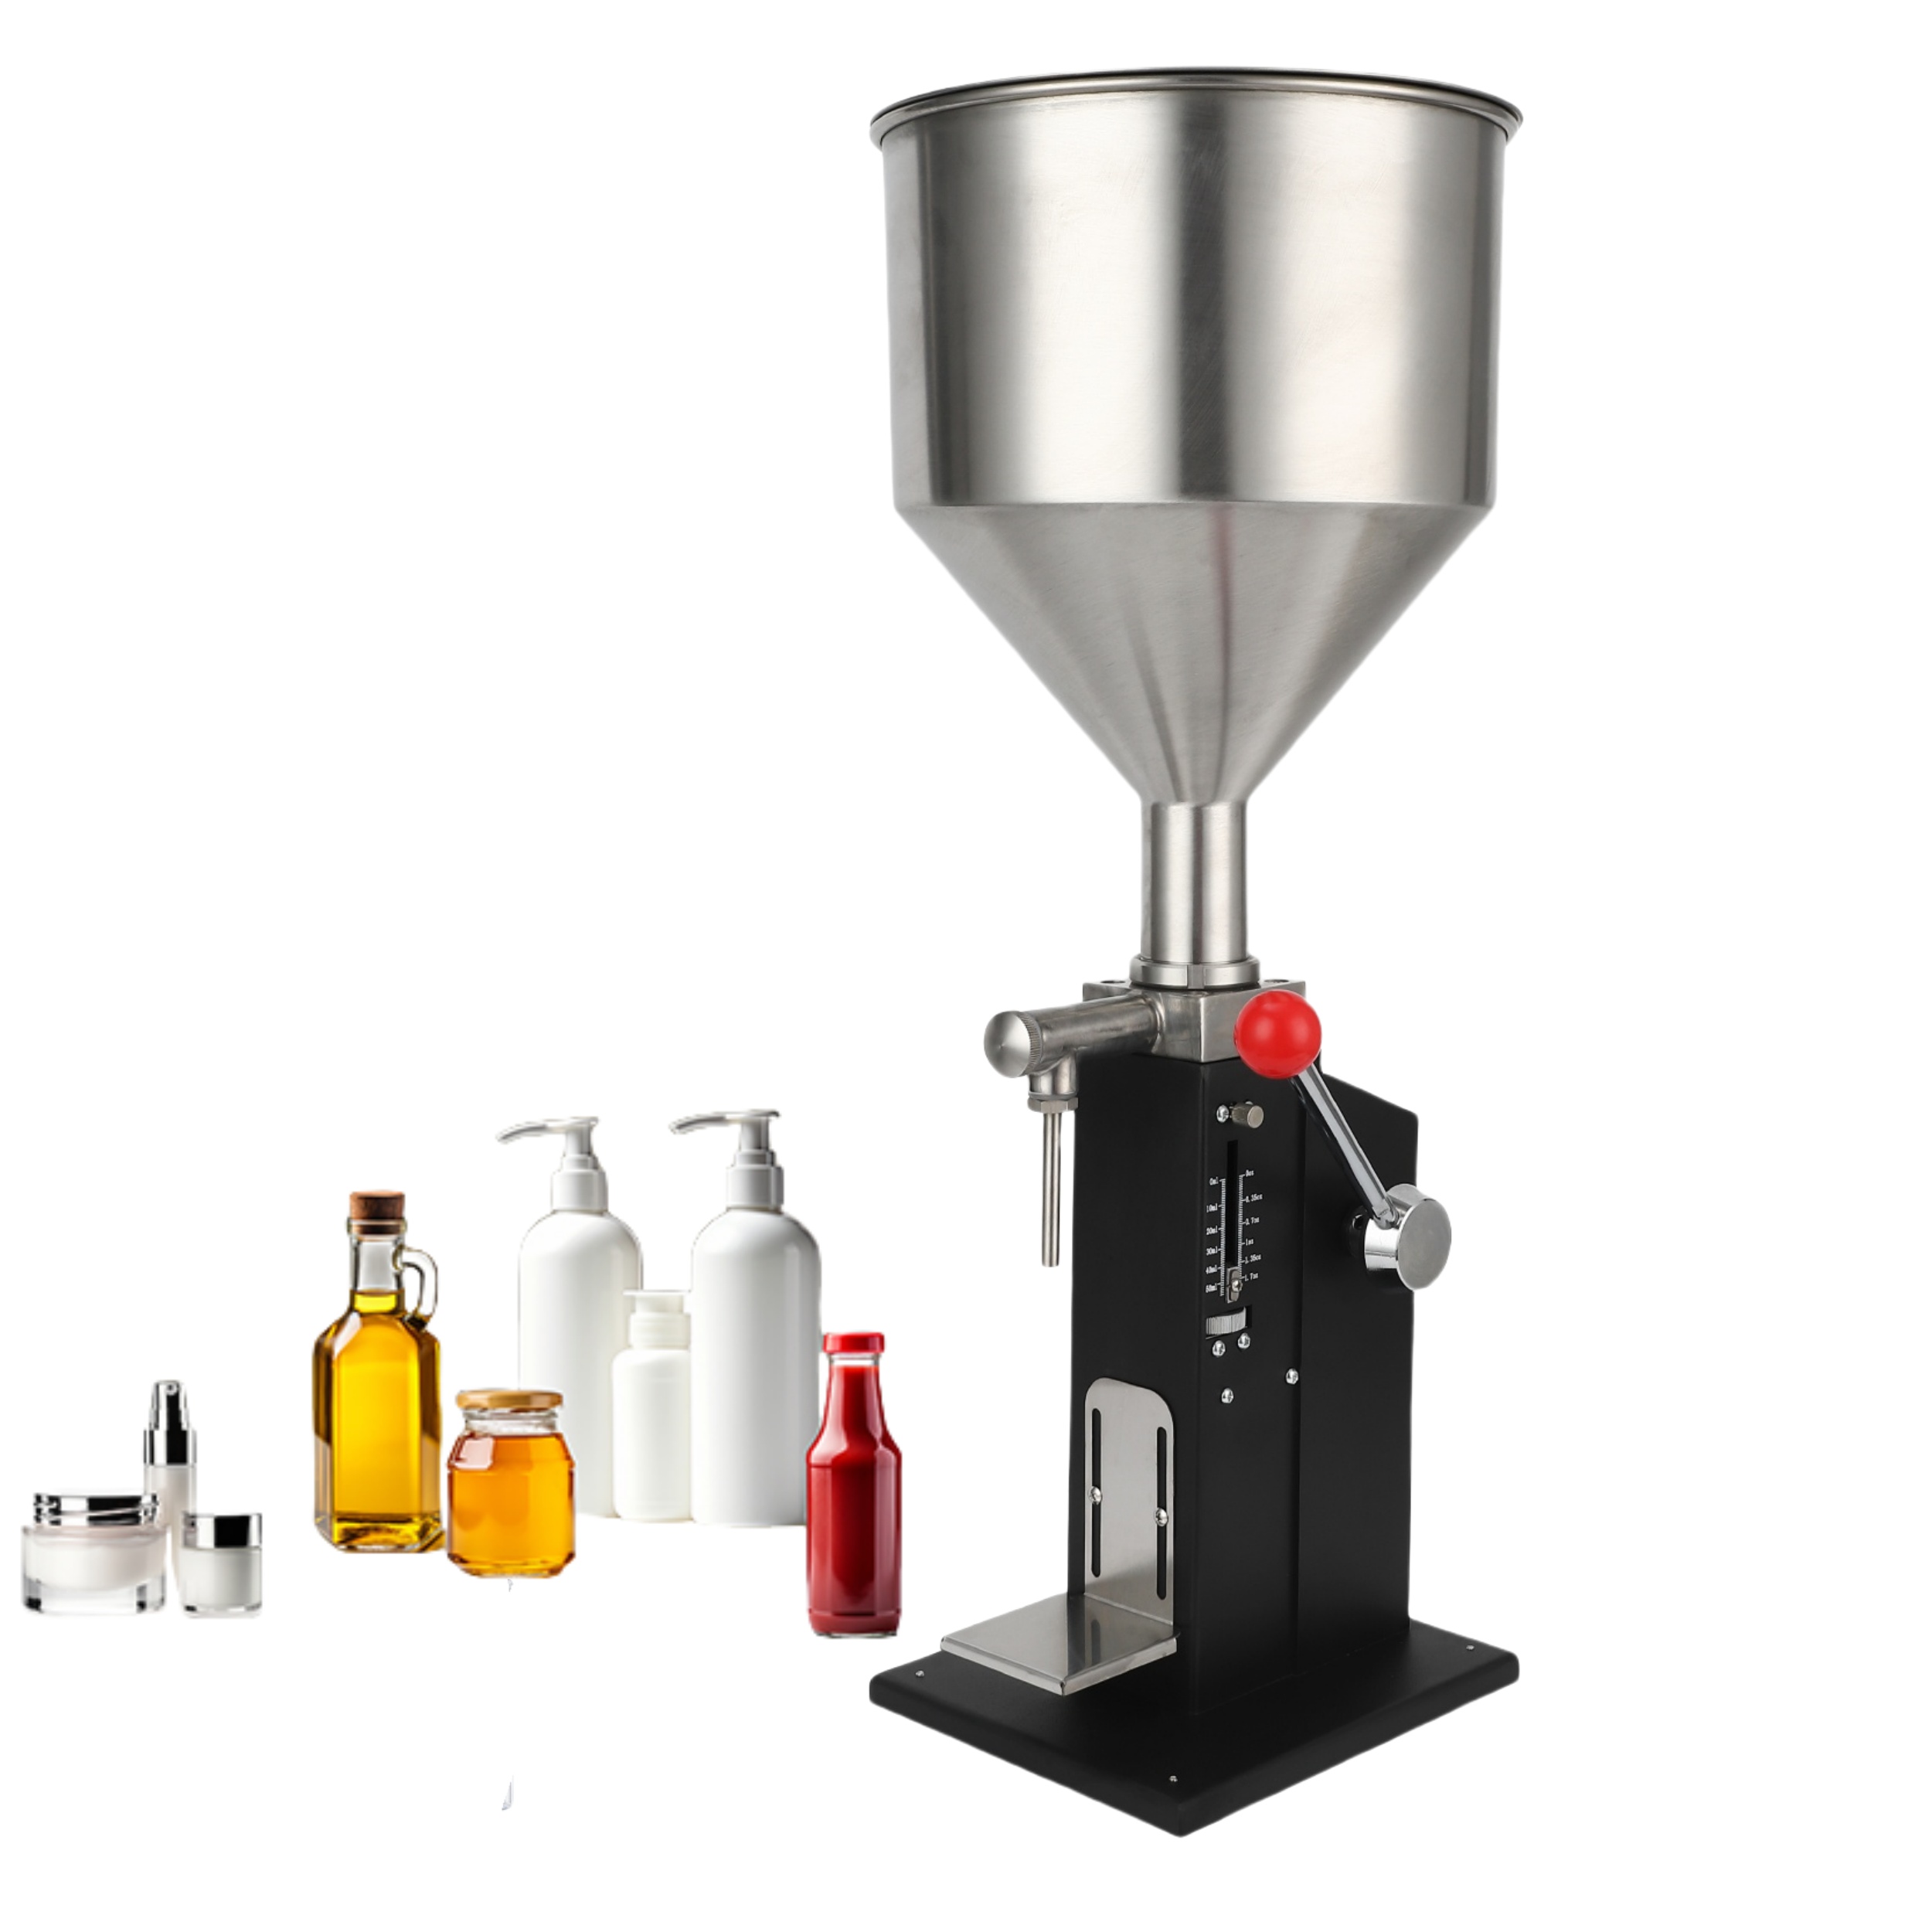 

Manual Paste Liquid Filling Machine, 5-50ml Adjustable Bottle Filling Machine, 304 Stainless Steel Liquid Filler With 10l Hopper For Milk Water Juice Essential Oil Shampoo Cosmetic